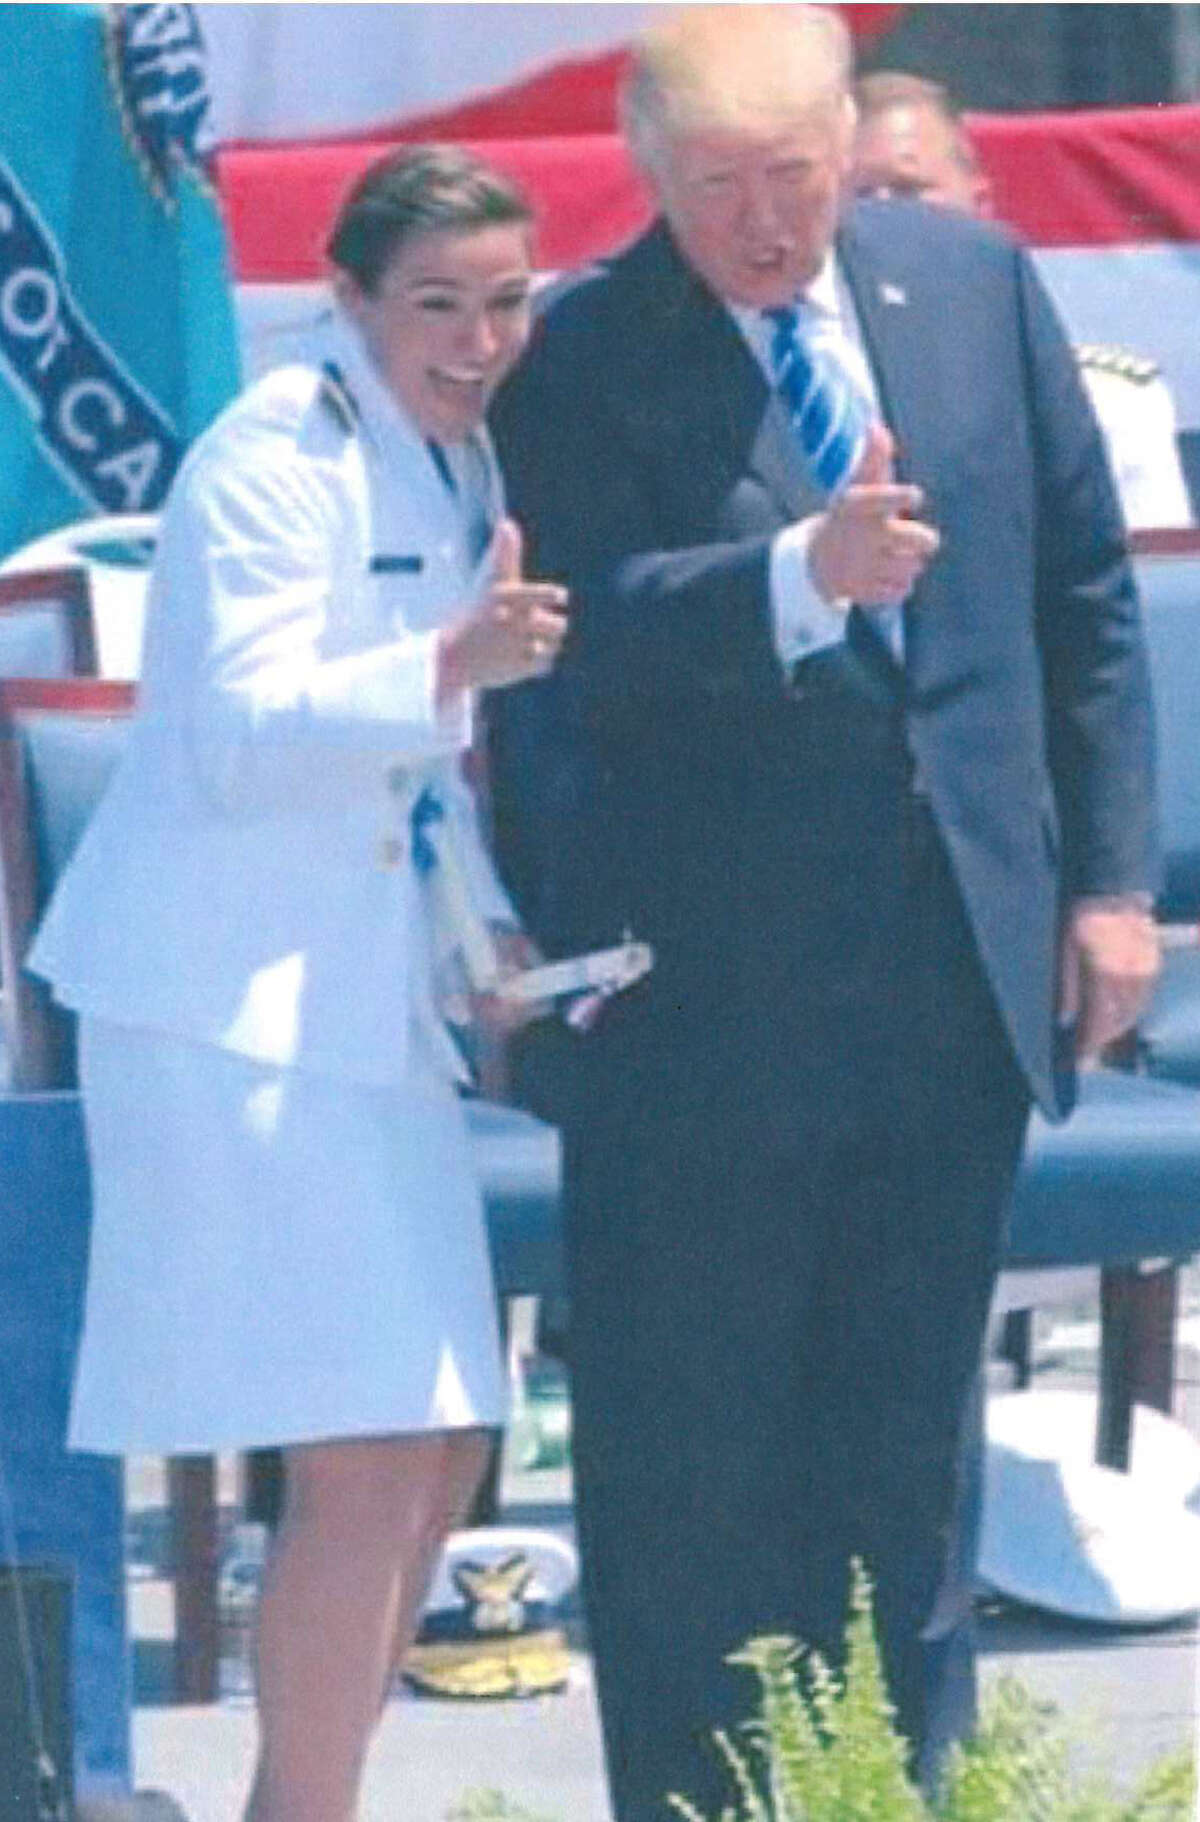 In a scene captured by numerous media outlets and published in newspapers and magazines worldwide, President Donald Trump gestures with newly-commissioned U.S. Coast Guard Ensign Erin Reynolds during the U.S. Coast Guard Academy Commencement Ceremony in New London, Connecticut, on May 17. Reynolds is the daughter of 1982 Plainview High School graduate Mark Reynolds, niece of Judy and Roy Tullis and Andy and Billie Reynolds of Plainview, and granddaughter of Janet Struvey of Slaton.